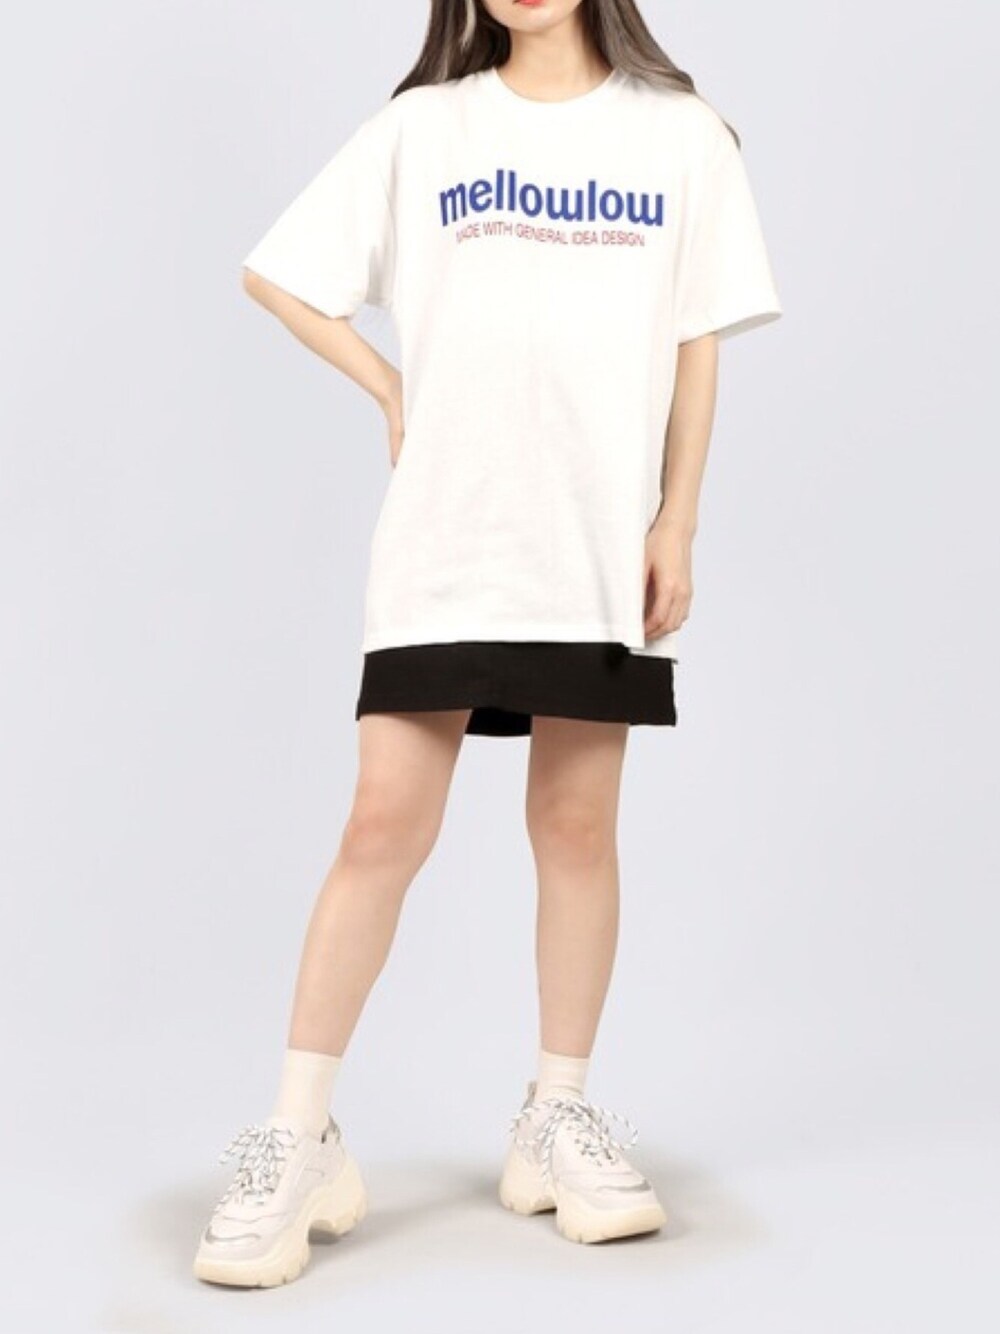 DING_officialさんの「DING/mellowlow Tシャツ（DING）」を使ったコーディネート